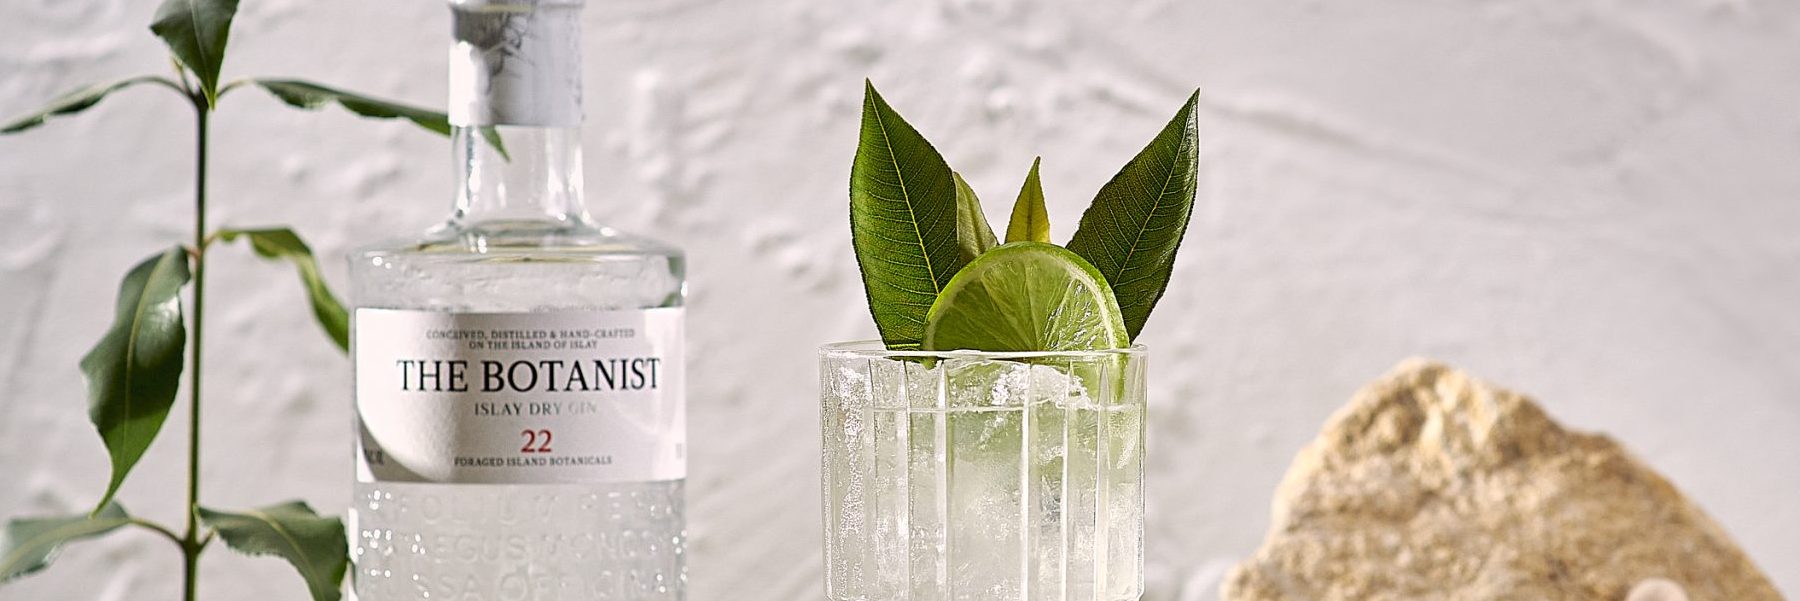 The Botanist Lemon Myrtle B & T in a highball glass with a bottle of the Botanist Gin Bottle